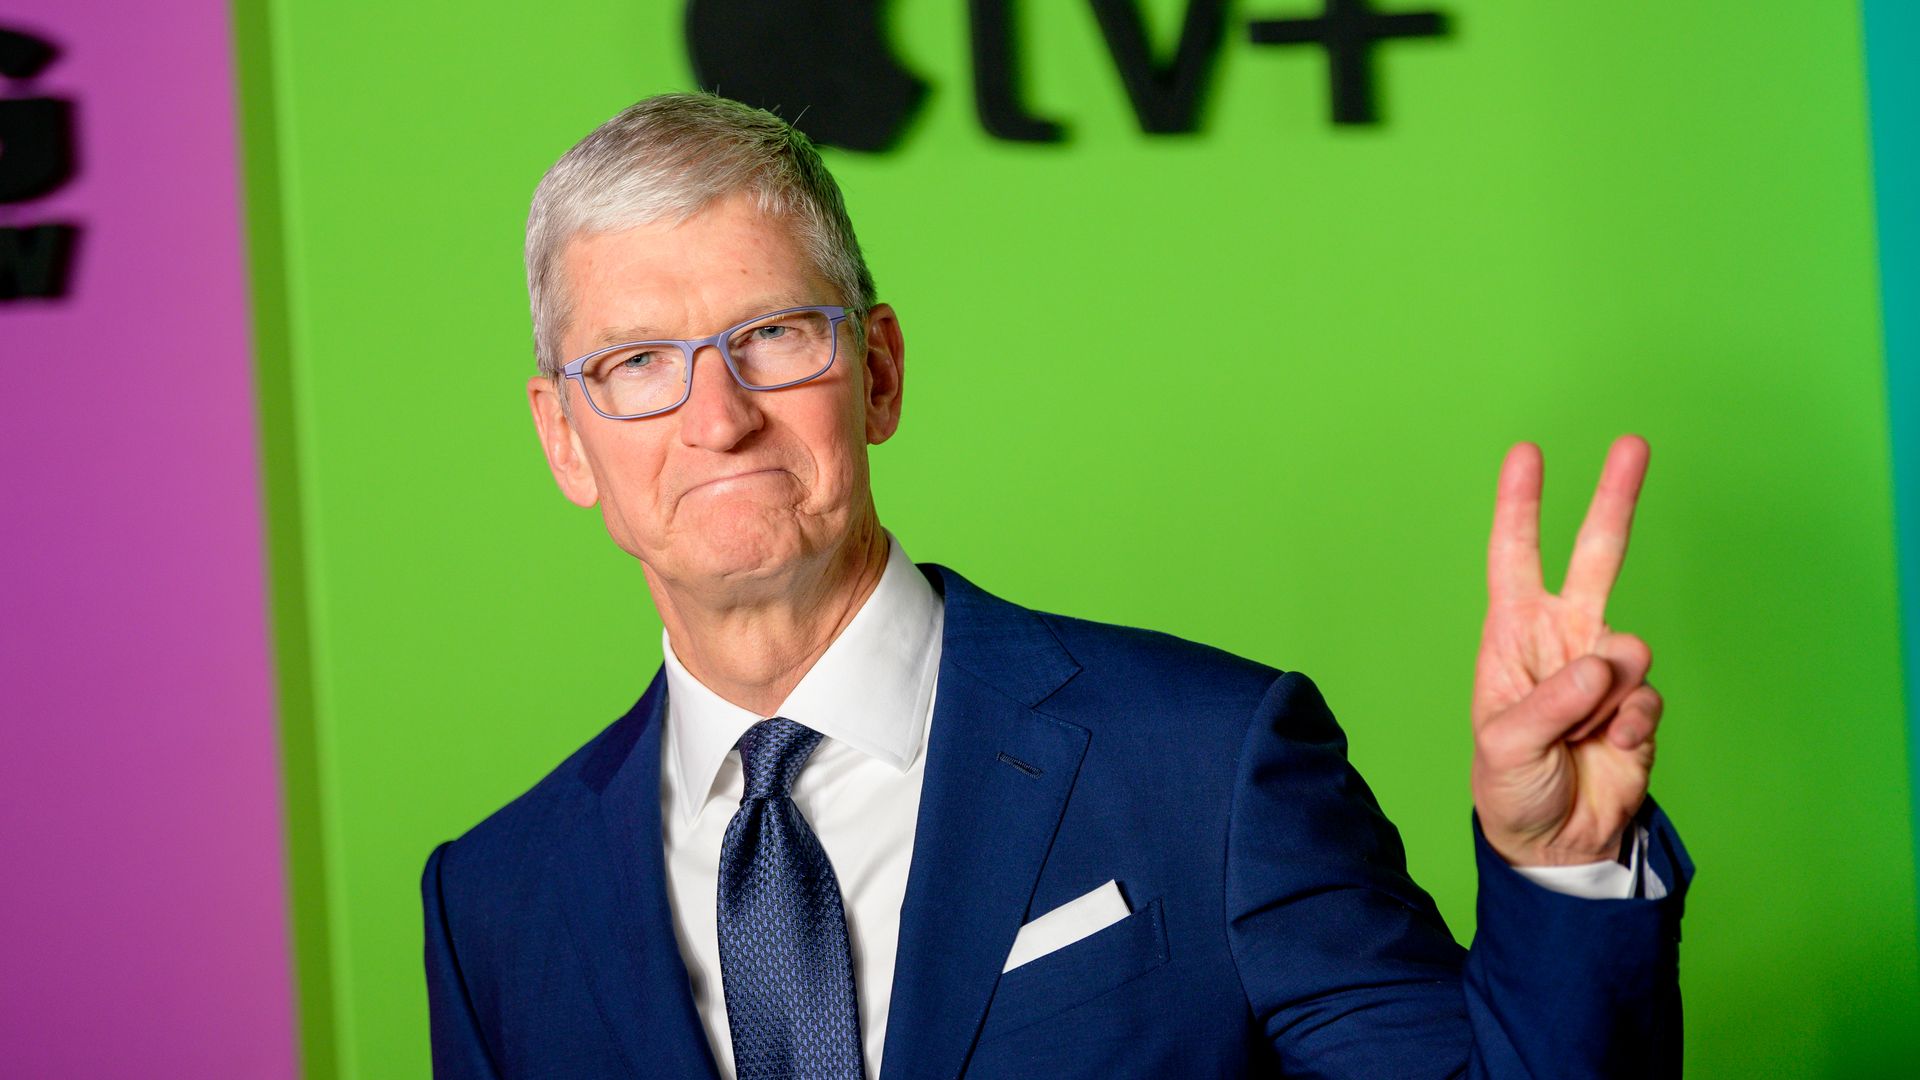 Apple CEO Tim Cook in a suit and tie, flashing a peace sign